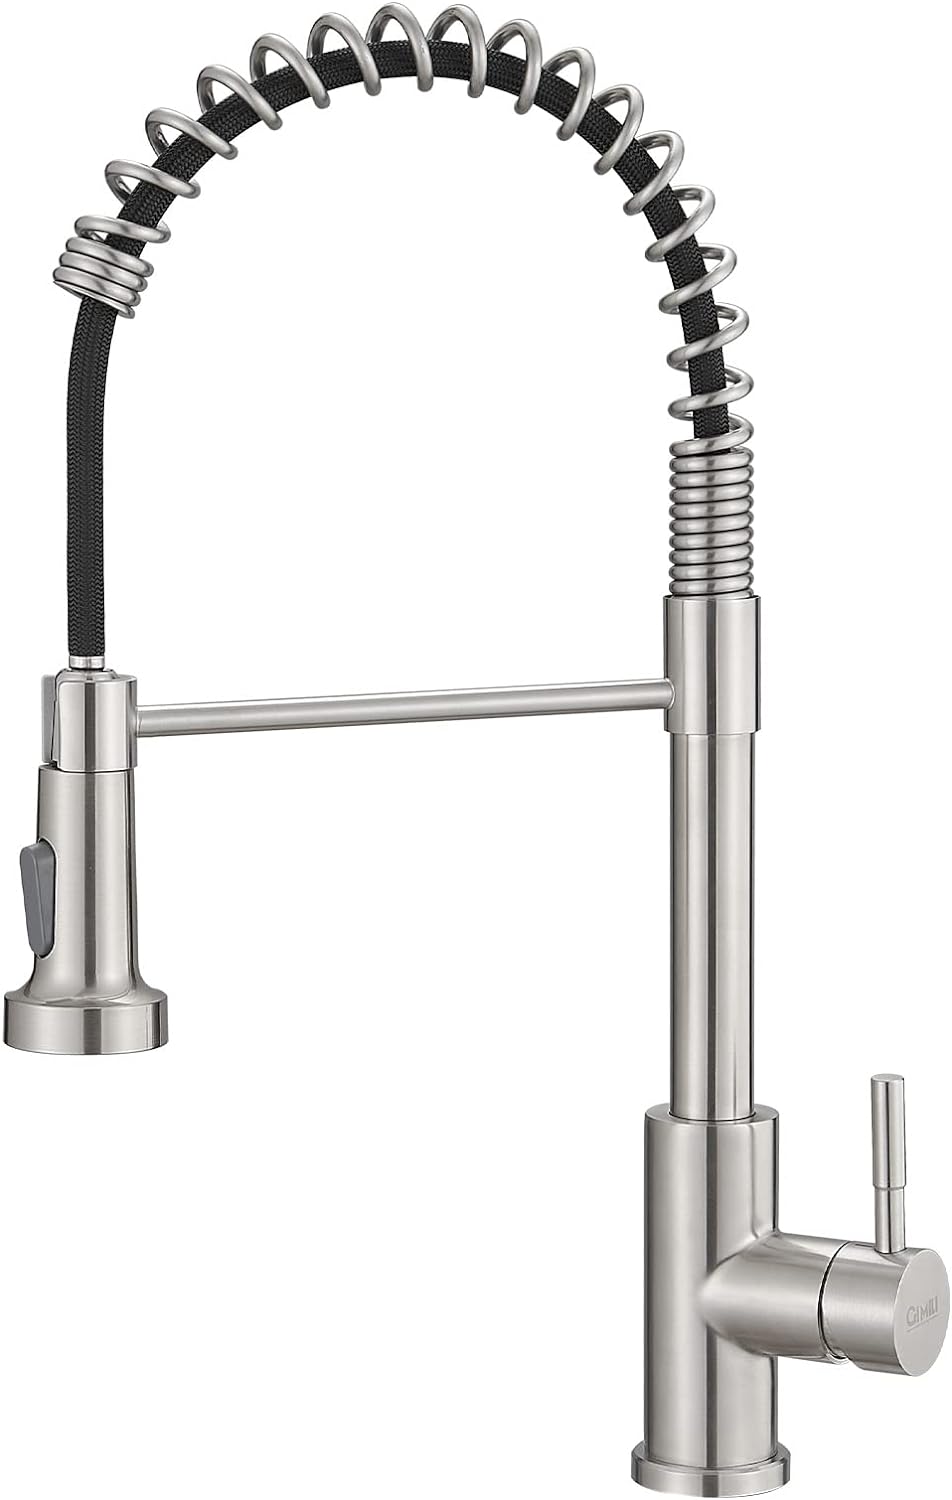 A quality product that was made for people that like to install it themselve. Instruction are a step by step installation which made it very easy. My wife is thrilled with the design and usability and so am l. We would highly recommend this faucet. Affordable, stylish, useful, and will not break the bank. This is a homerun and is exactly one of the reasons why we buy from Amazon.